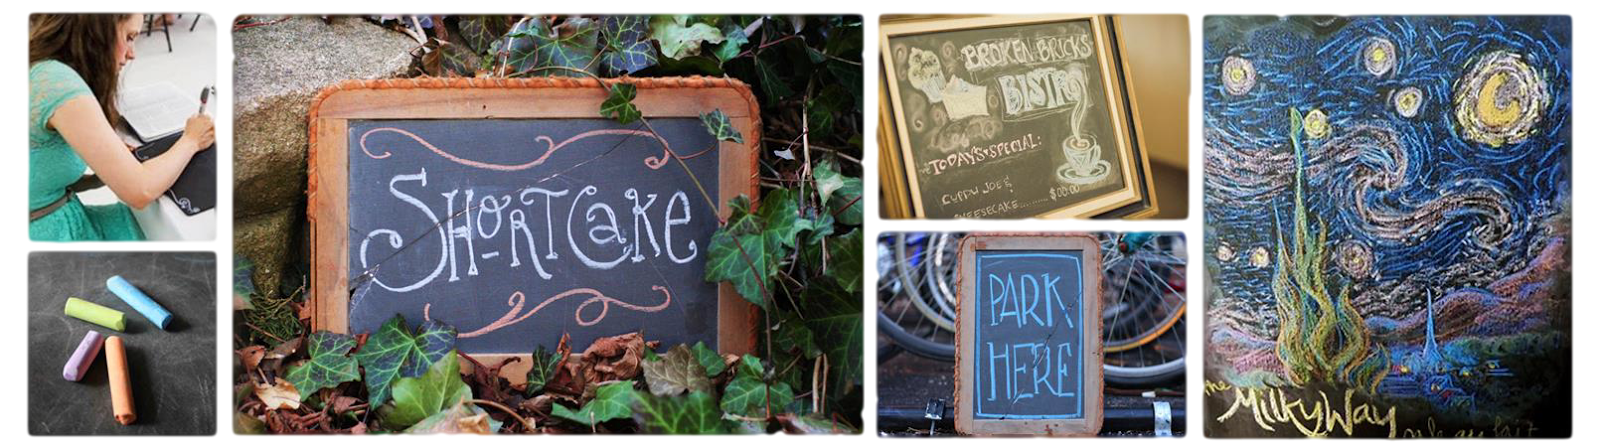 ShortCake: Chalkboards, Signs, and Announcements with a Whimsical Twist